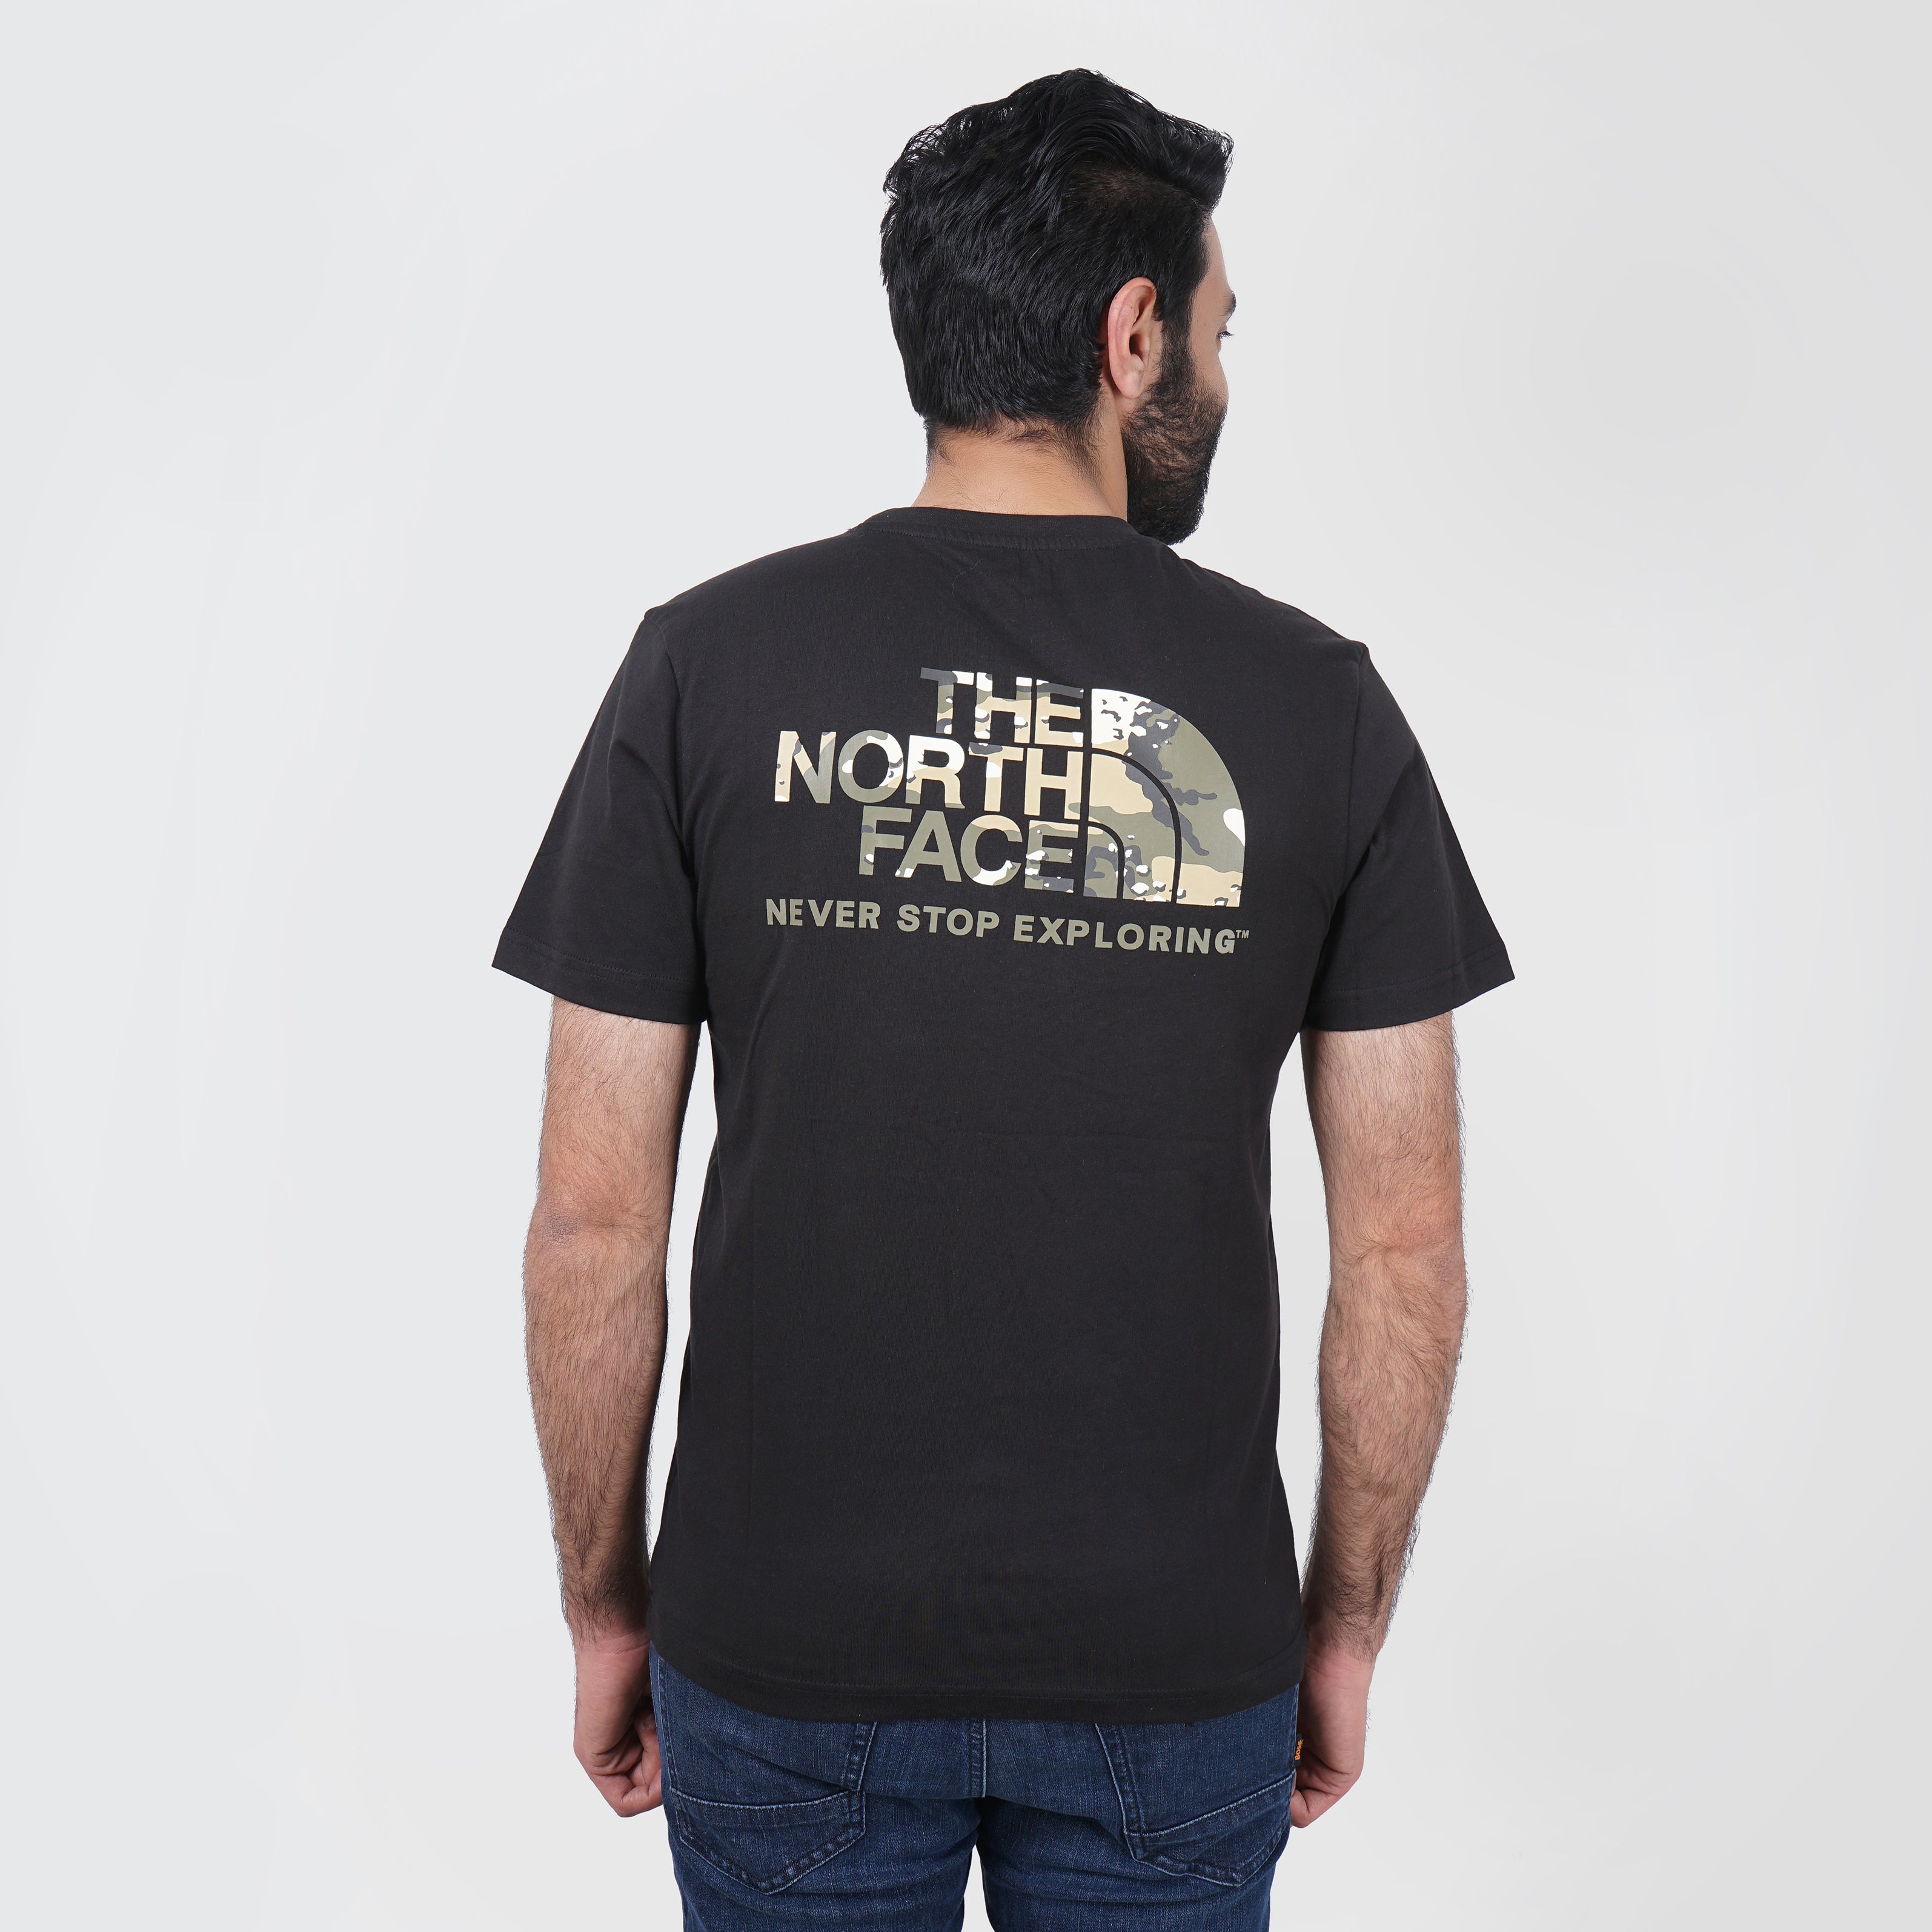 Man wearing a black North Face t-shirt with logo and 'Never Stop Exploring' slogan on the back.